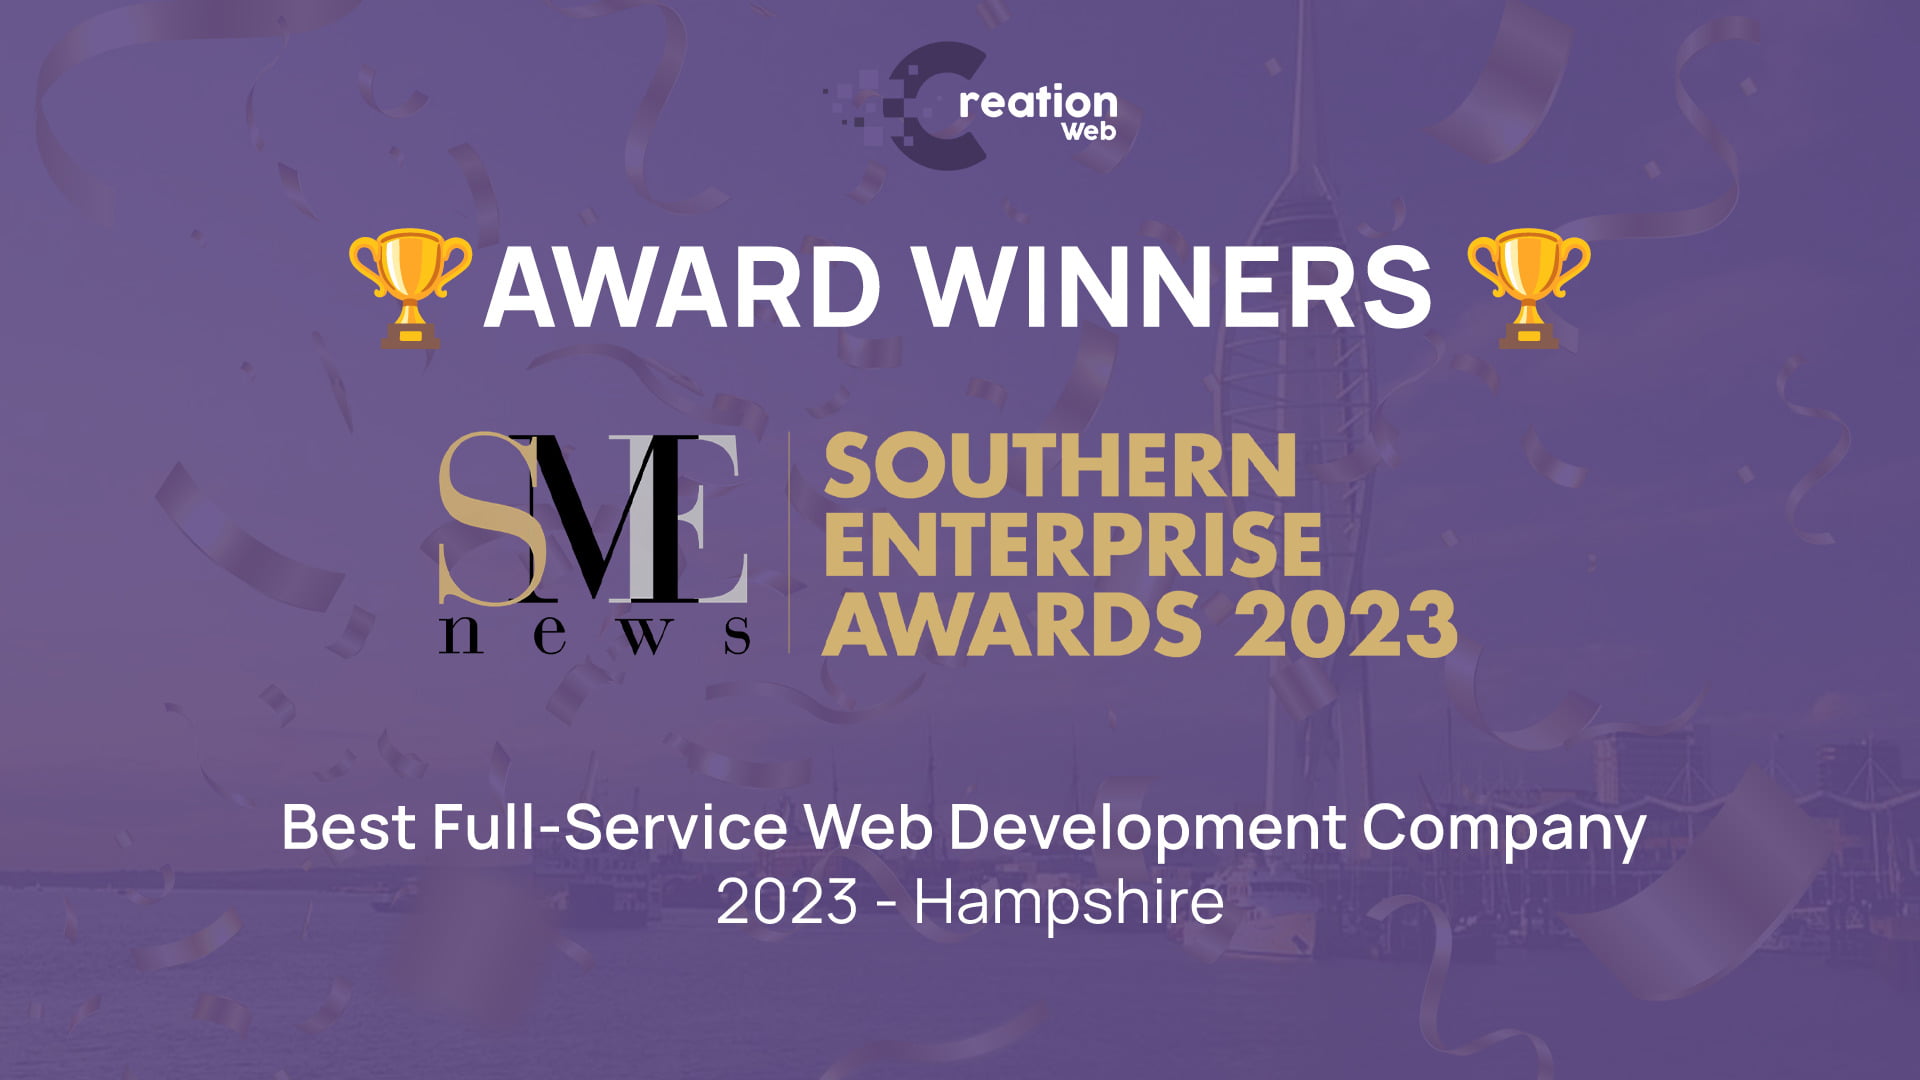 awardwinners Affordable App Development & SEO Agency in Portsmouth, Havant & Hampshire. We design and create websites From just £99